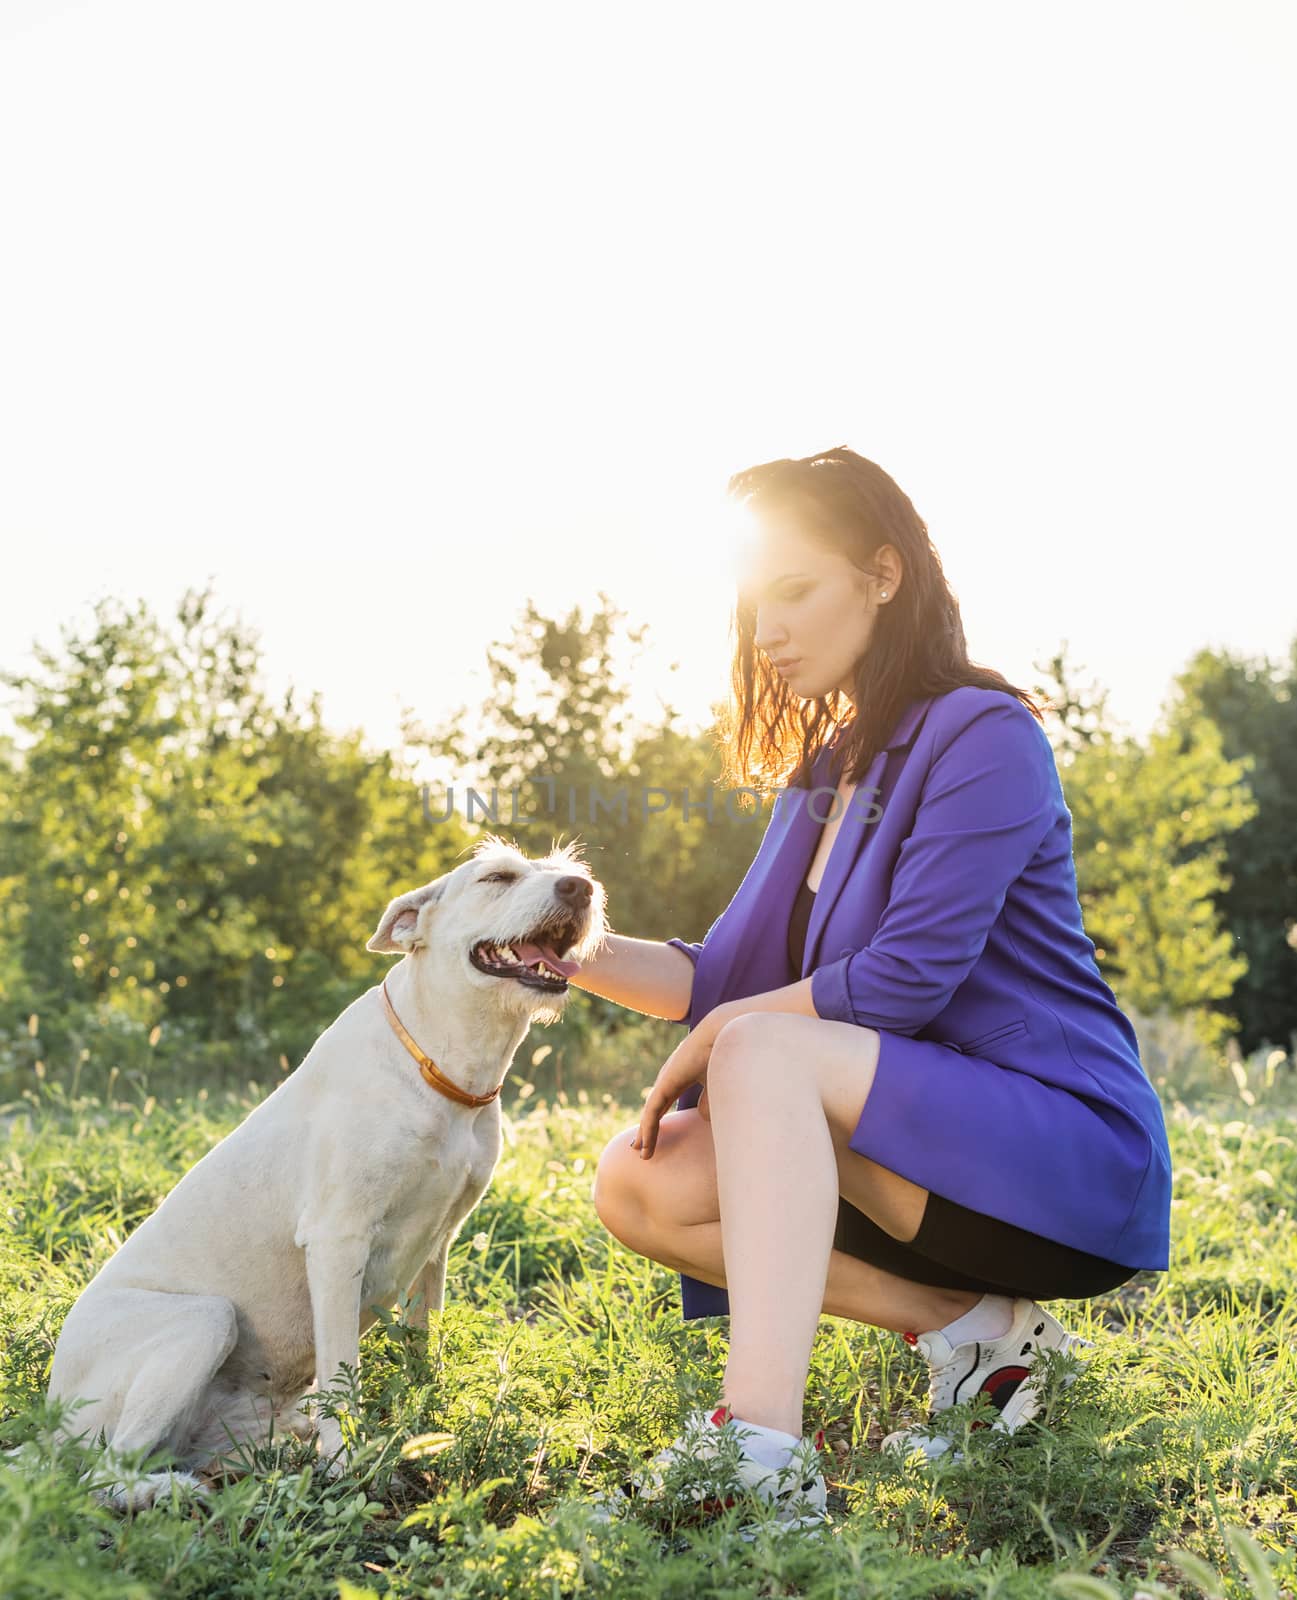 Pet care. Pet adoption. Young woman hugging her mixed breed dog in the park in the sunset